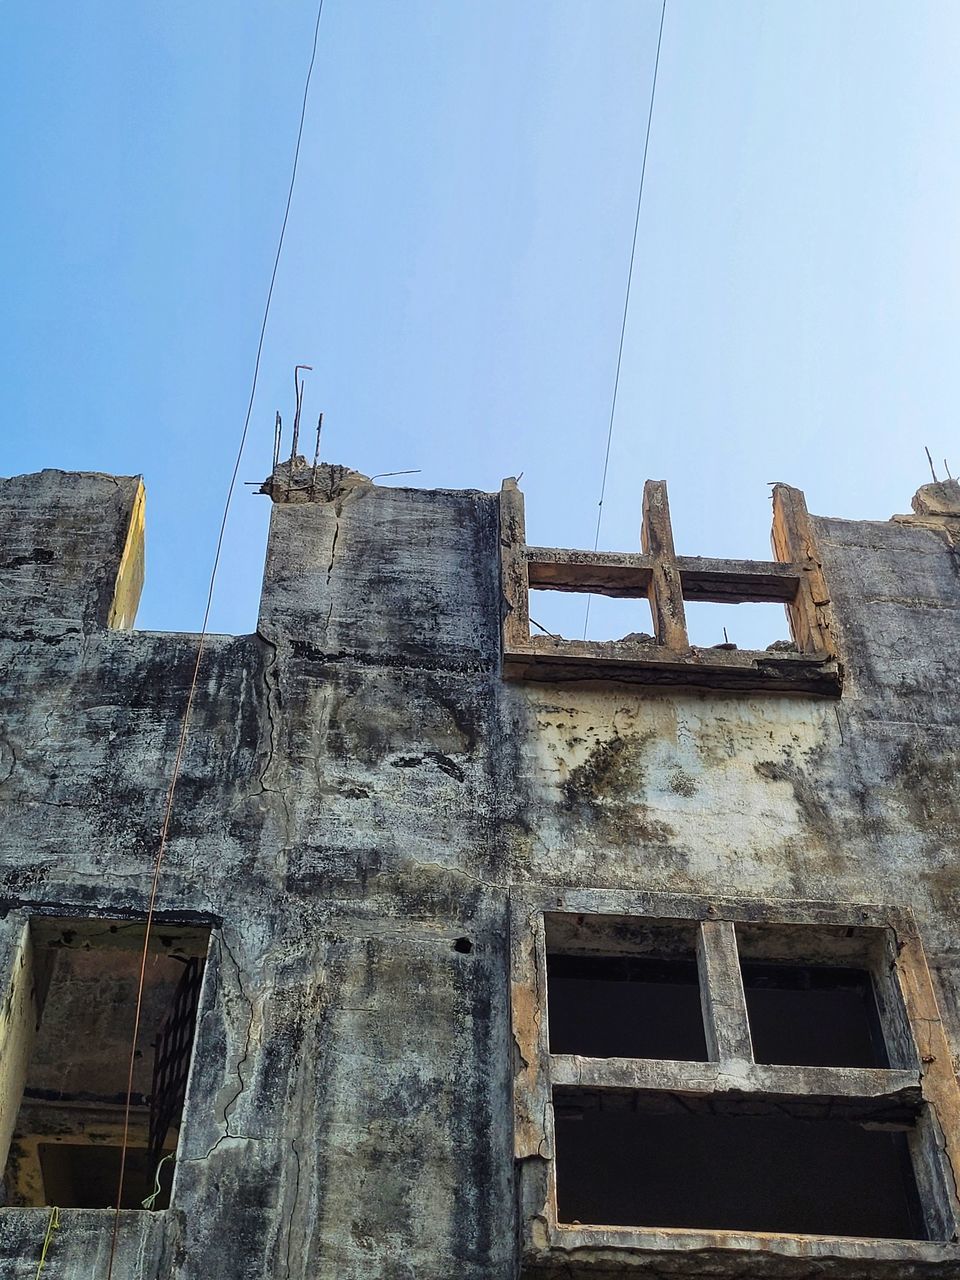 architecture, built structure, building exterior, sky, low angle view, building, no people, wall, history, clear sky, old, nature, house, window, day, ruins, the past, ancient history, roof, facade, outdoors, blue, abandoned, residential district, urban area, industry